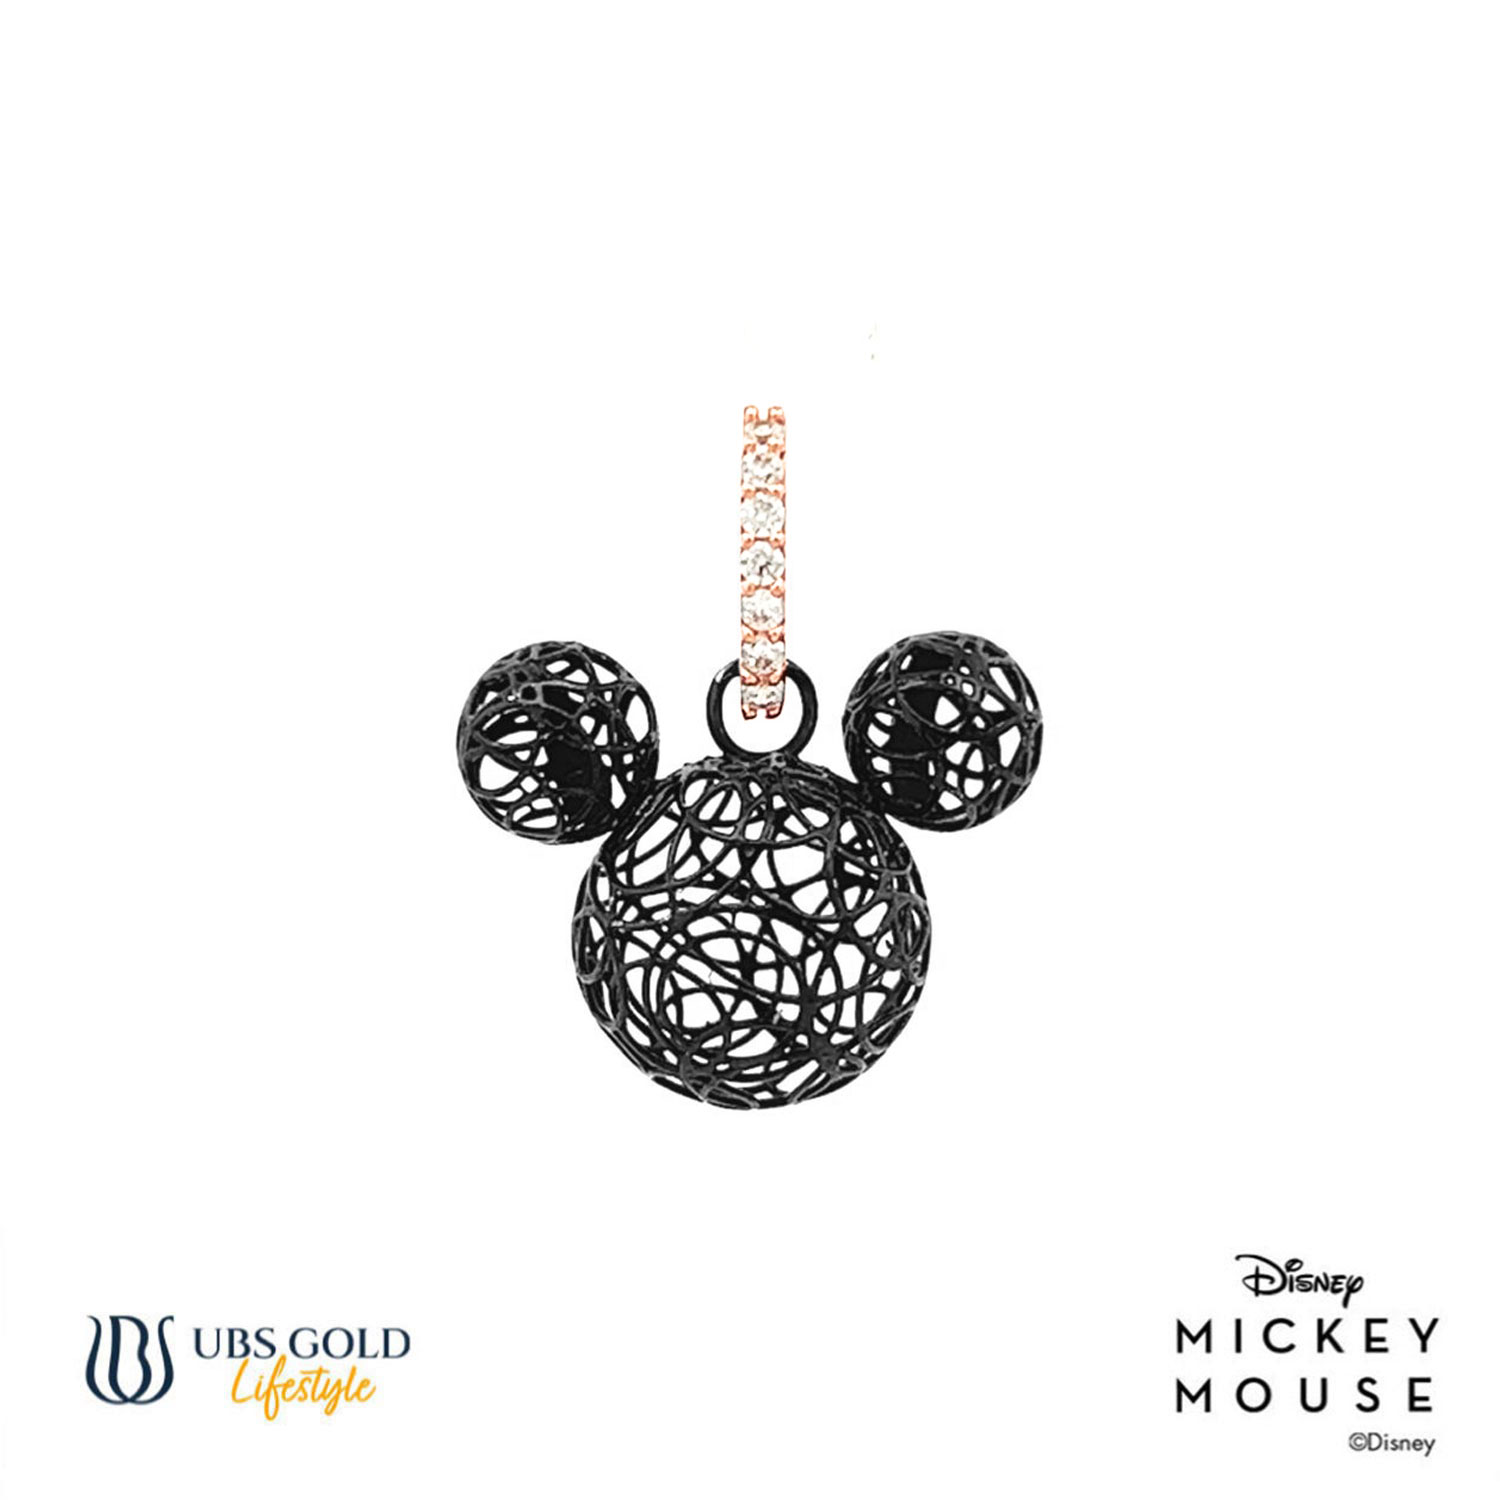 UBS Gold Liontin Emas Disney Mickey Mouse - Cly0023 - 17K